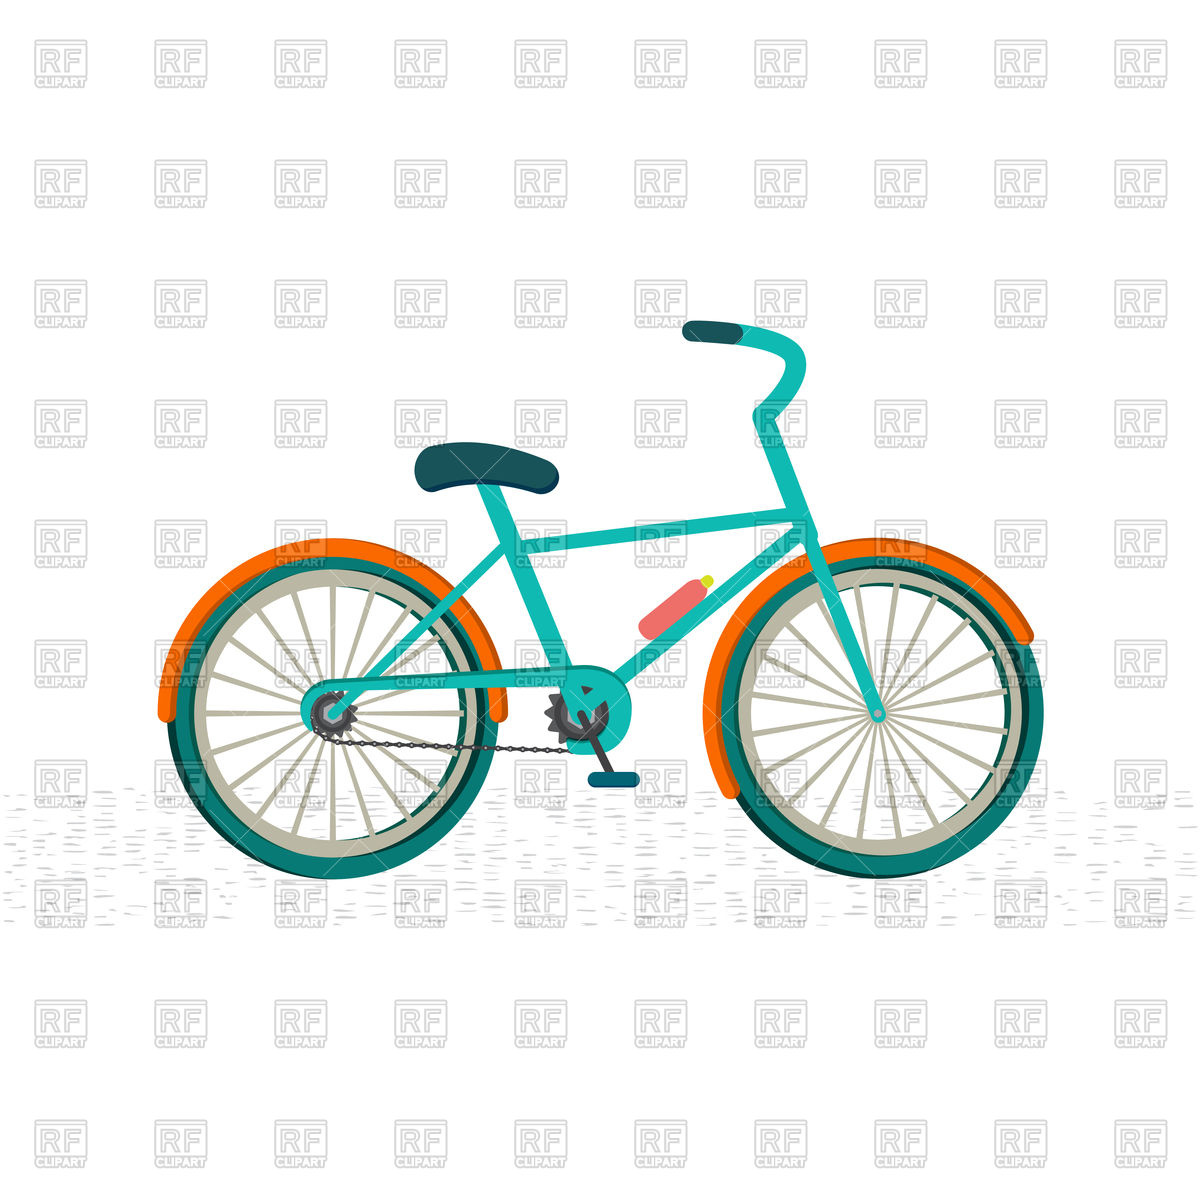     Bike On Road 77749 Download Royalty Free Vector Clipart  Eps